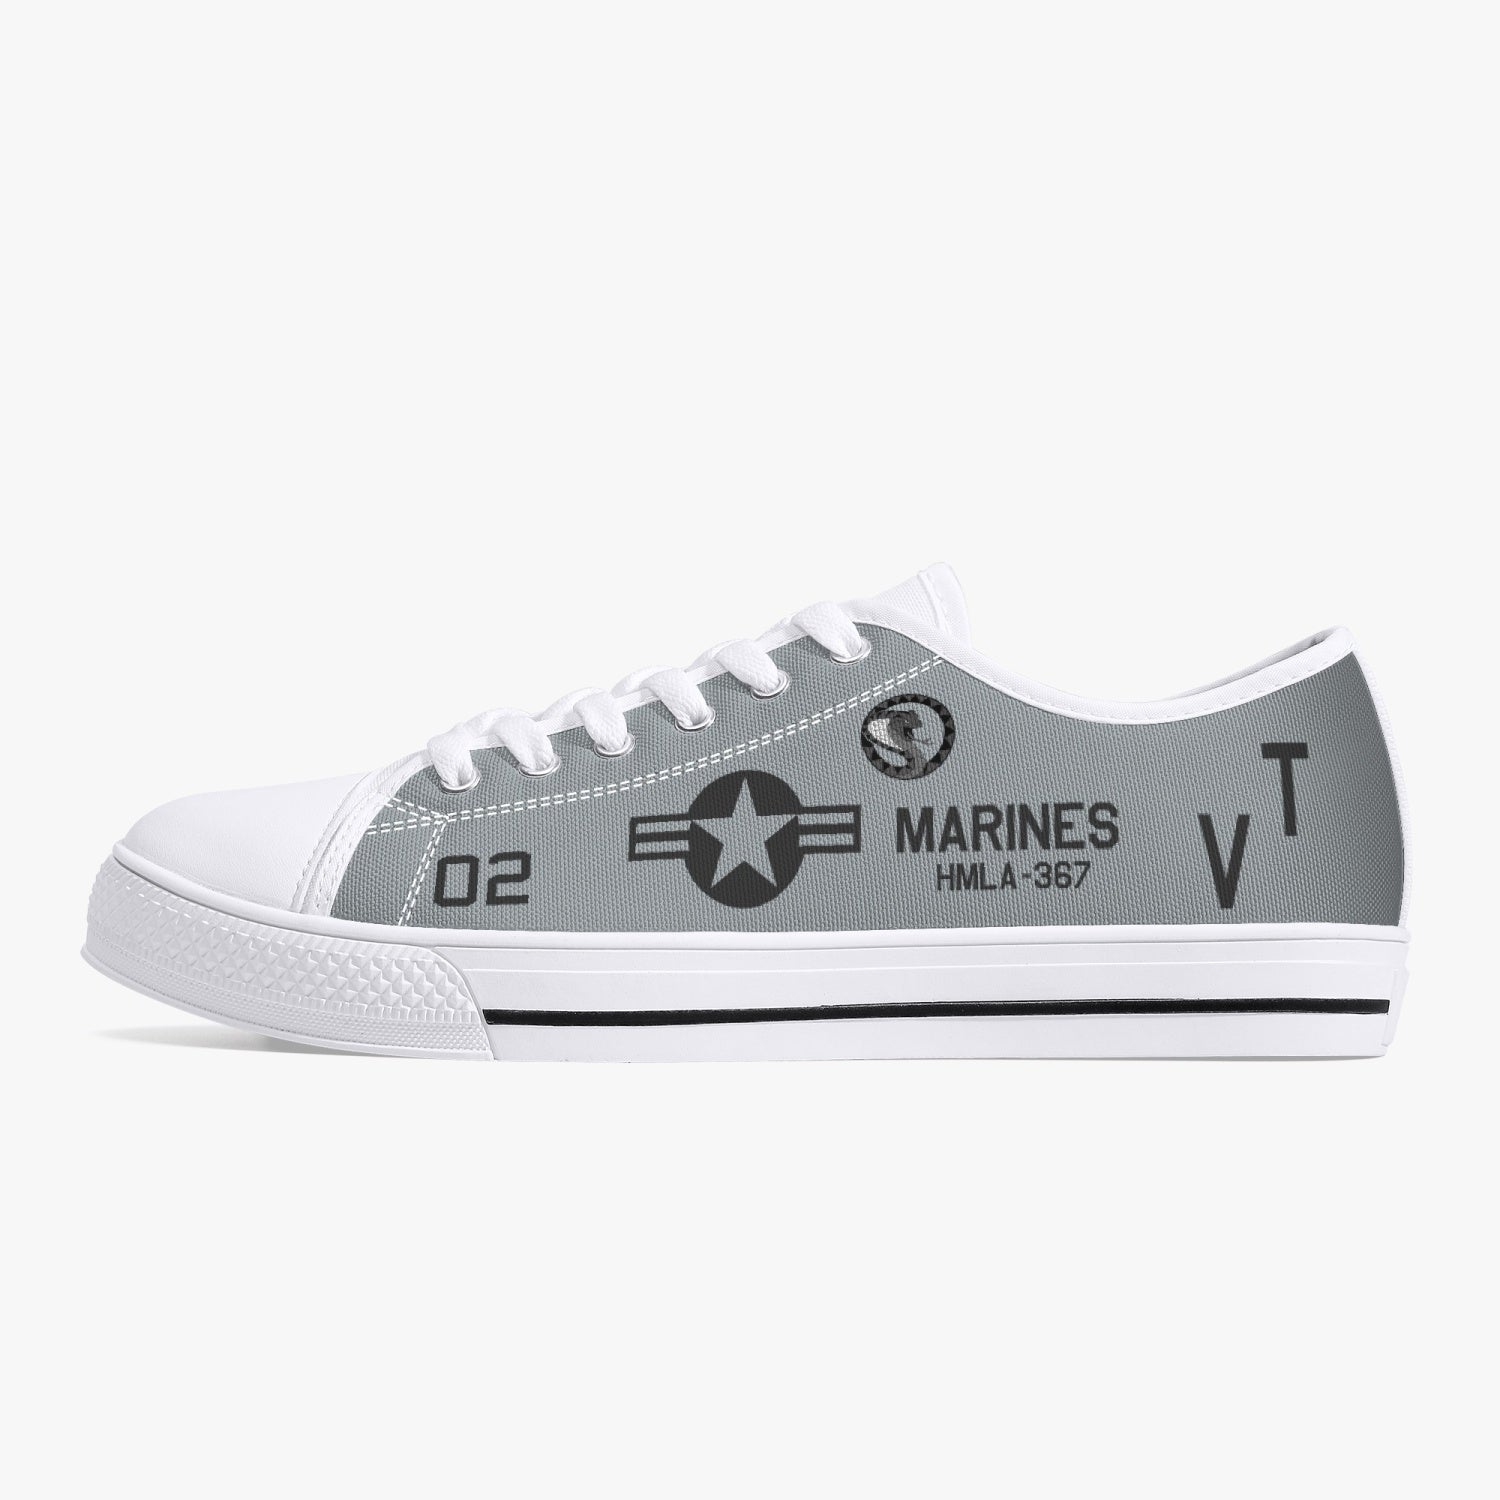 HMLA-367 "Scarface" Low Top Canvas Shoes - I Love a Hangar